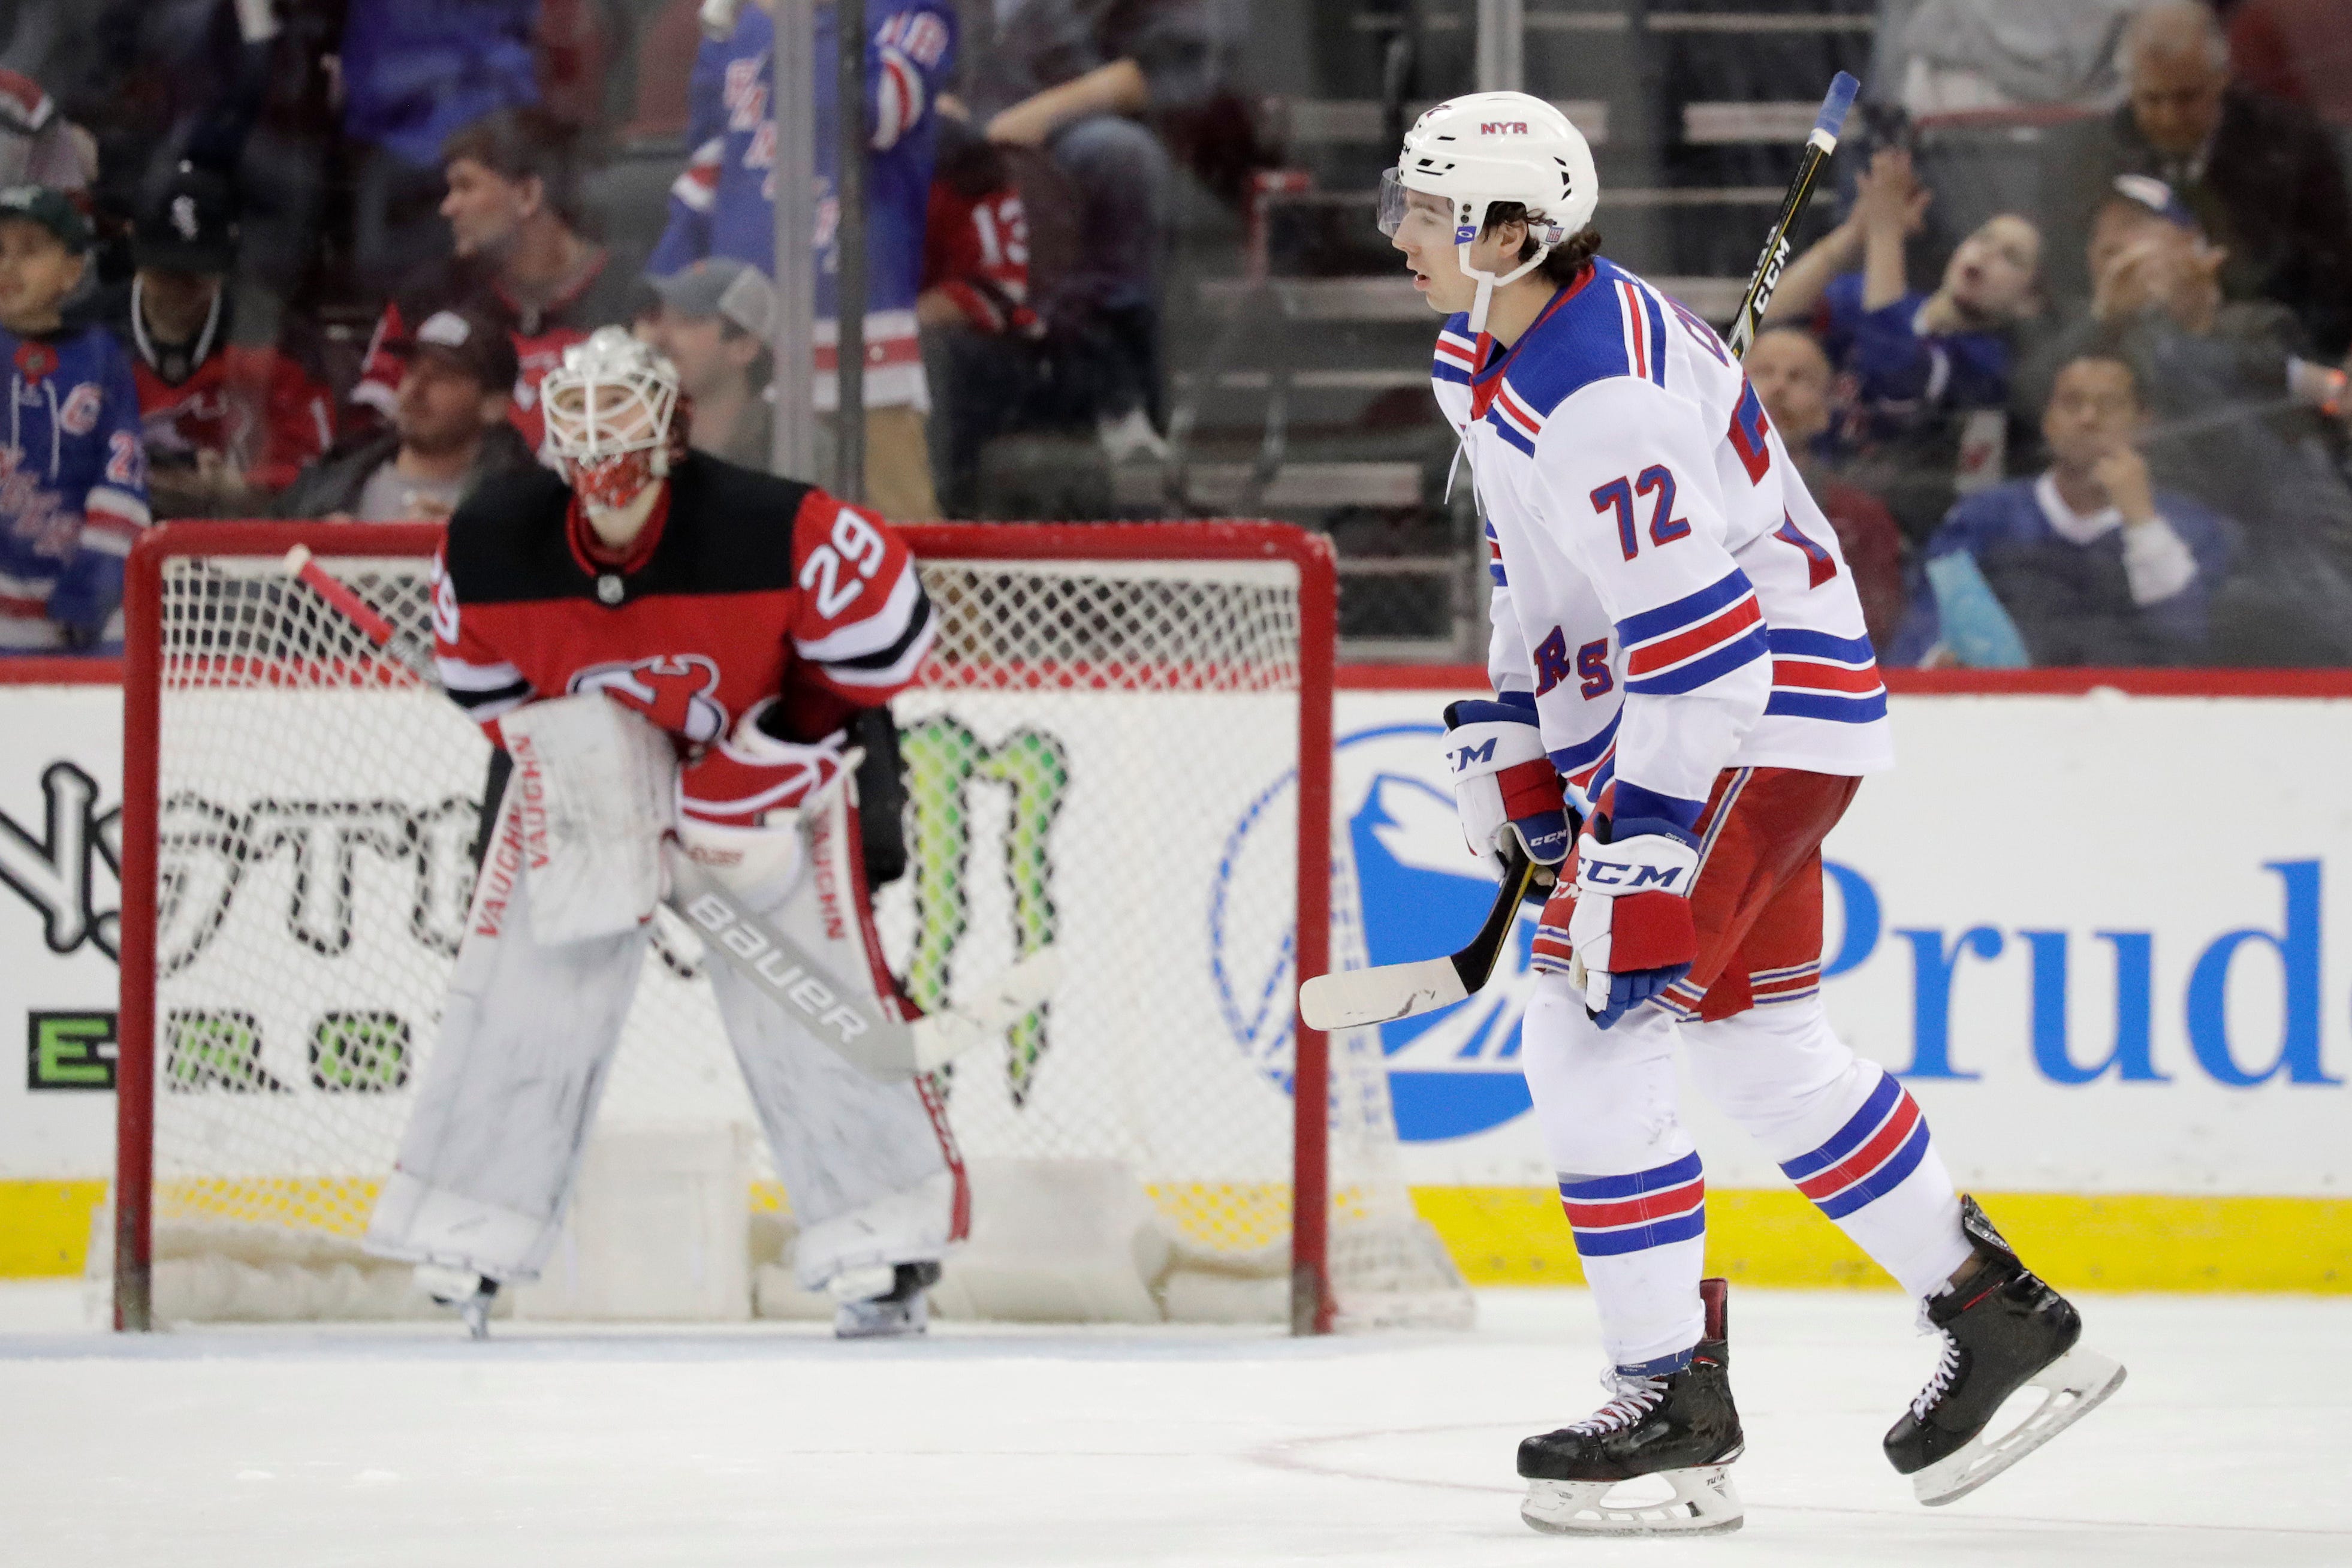 Carrick scores late as Devils beat Rangers, avoid sweep